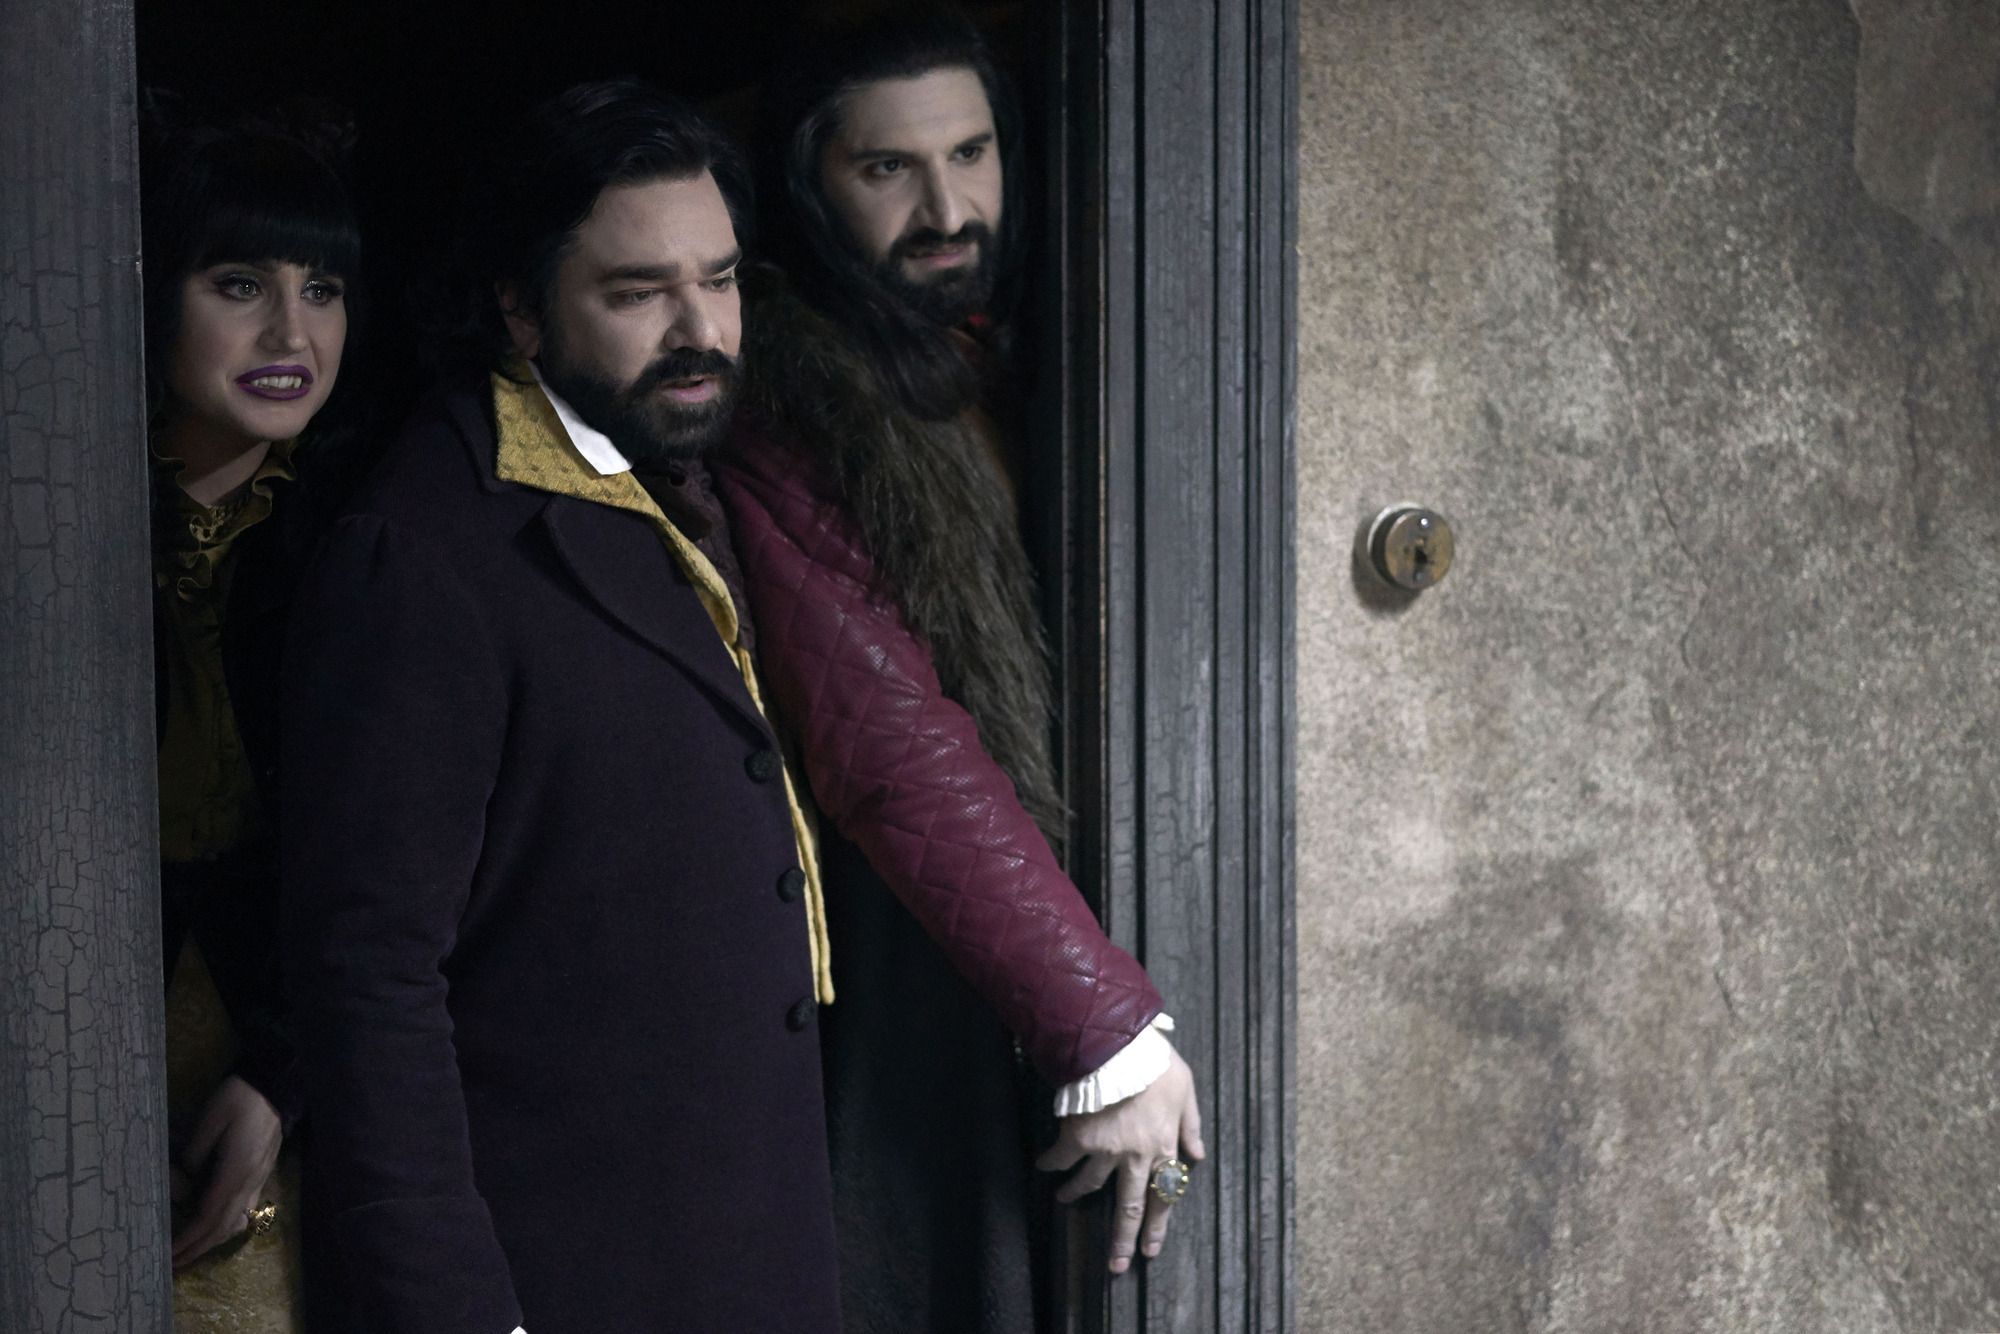 What We Do in the Shadows season 3 release date, cast and more